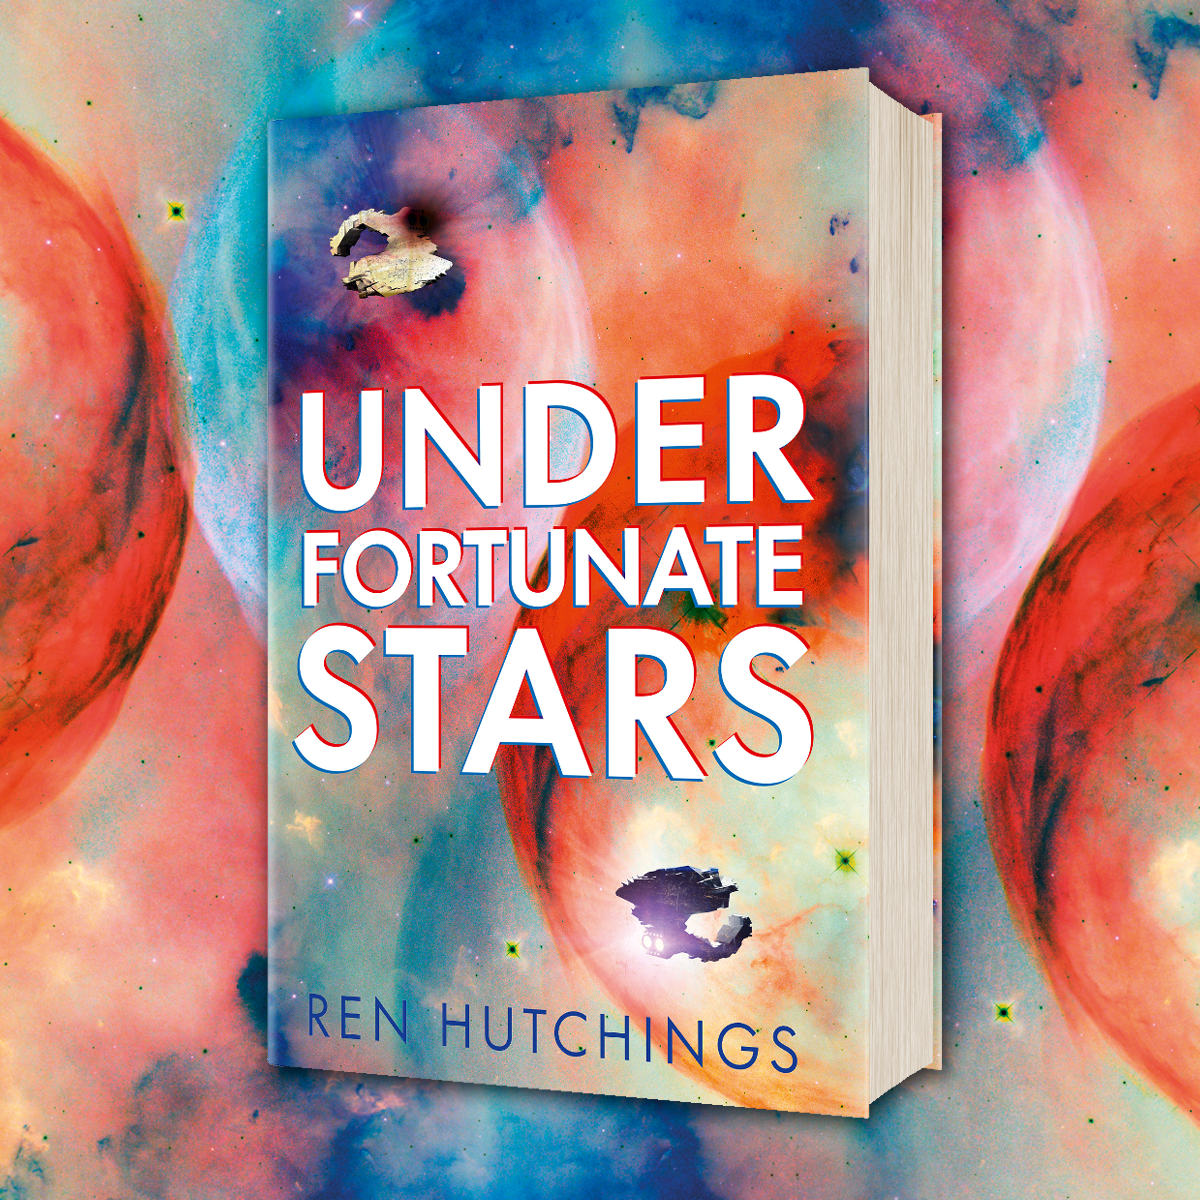 OUT NOW: Under Fortunate Stars by Ren Hutchings!